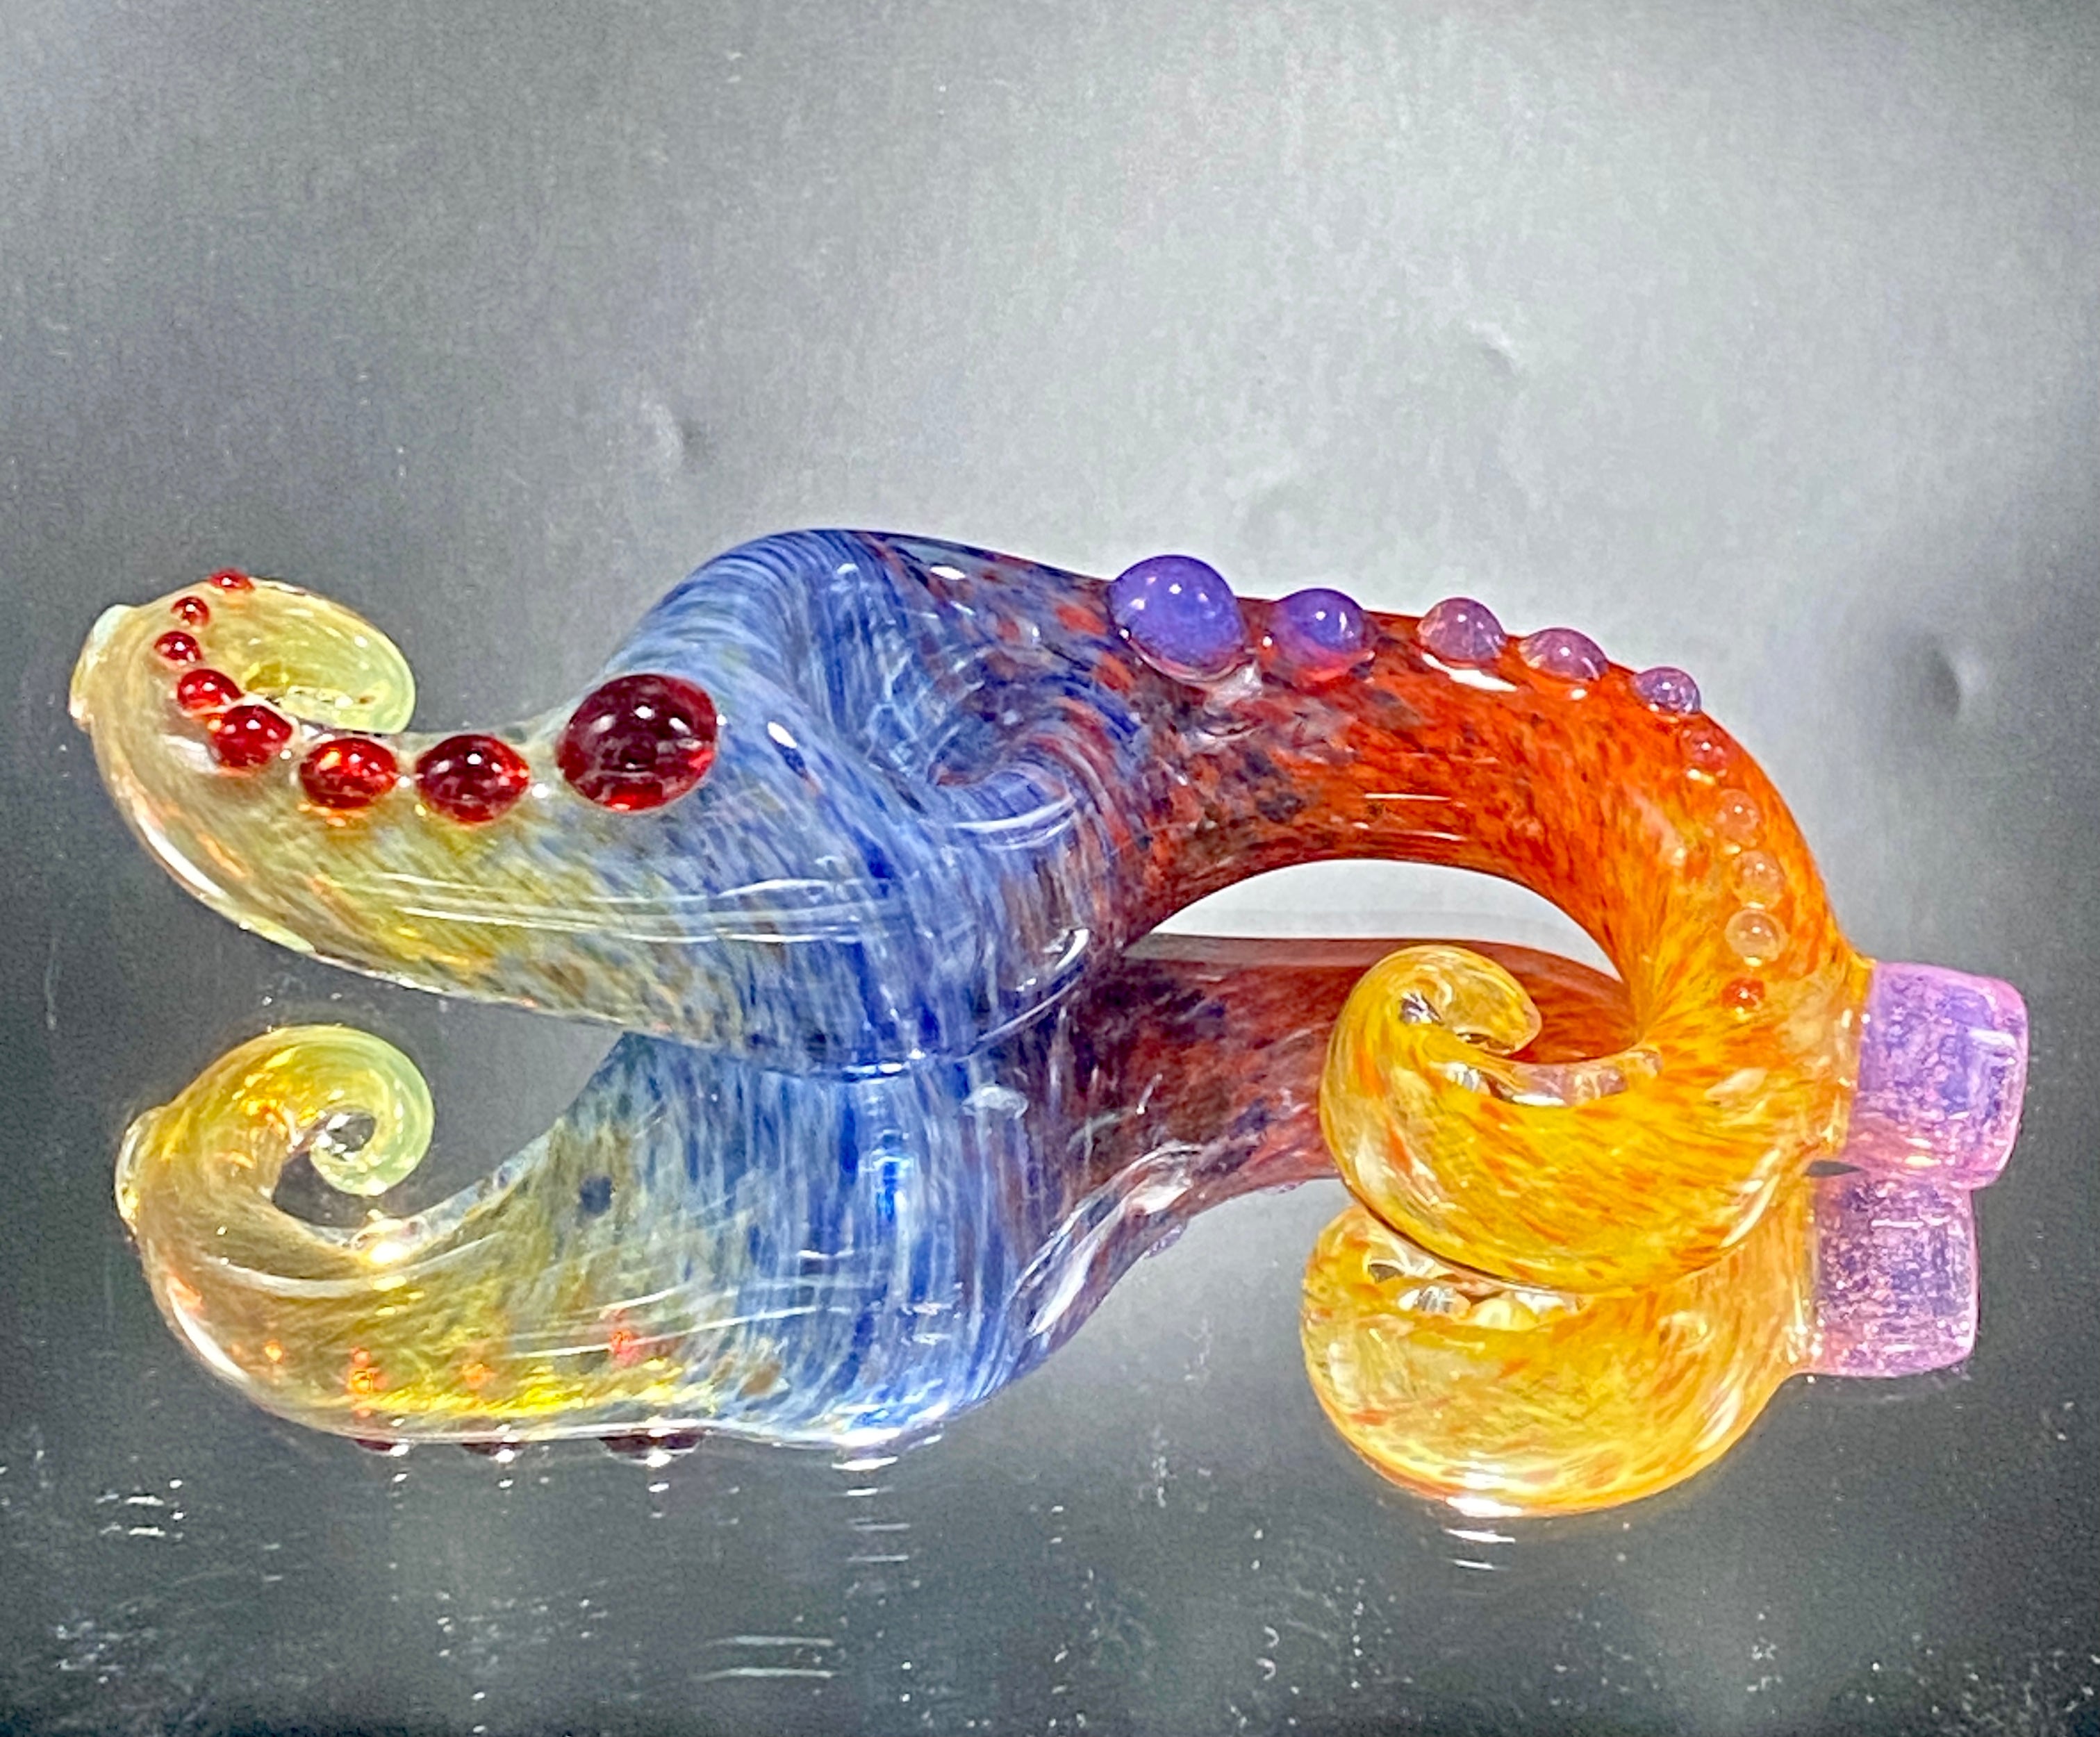 Global Glassworks "S" Curl Spoon Full Color Yellow Tail - TheSmokeyMcPotz Collection 